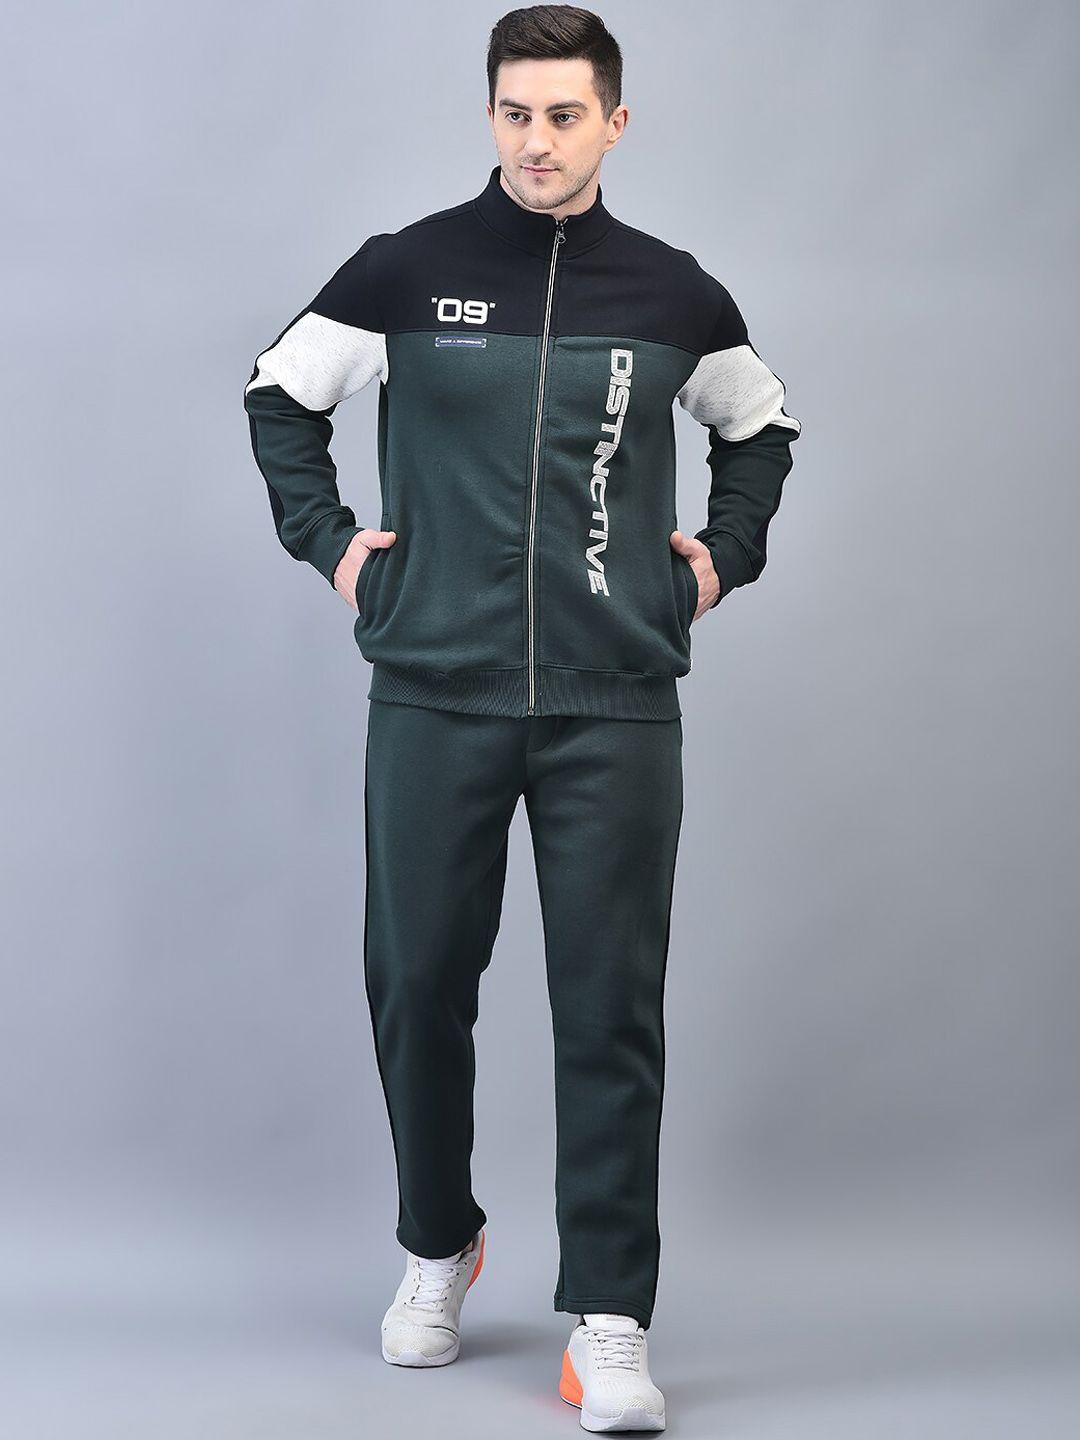 canoe typography printed tracksuits